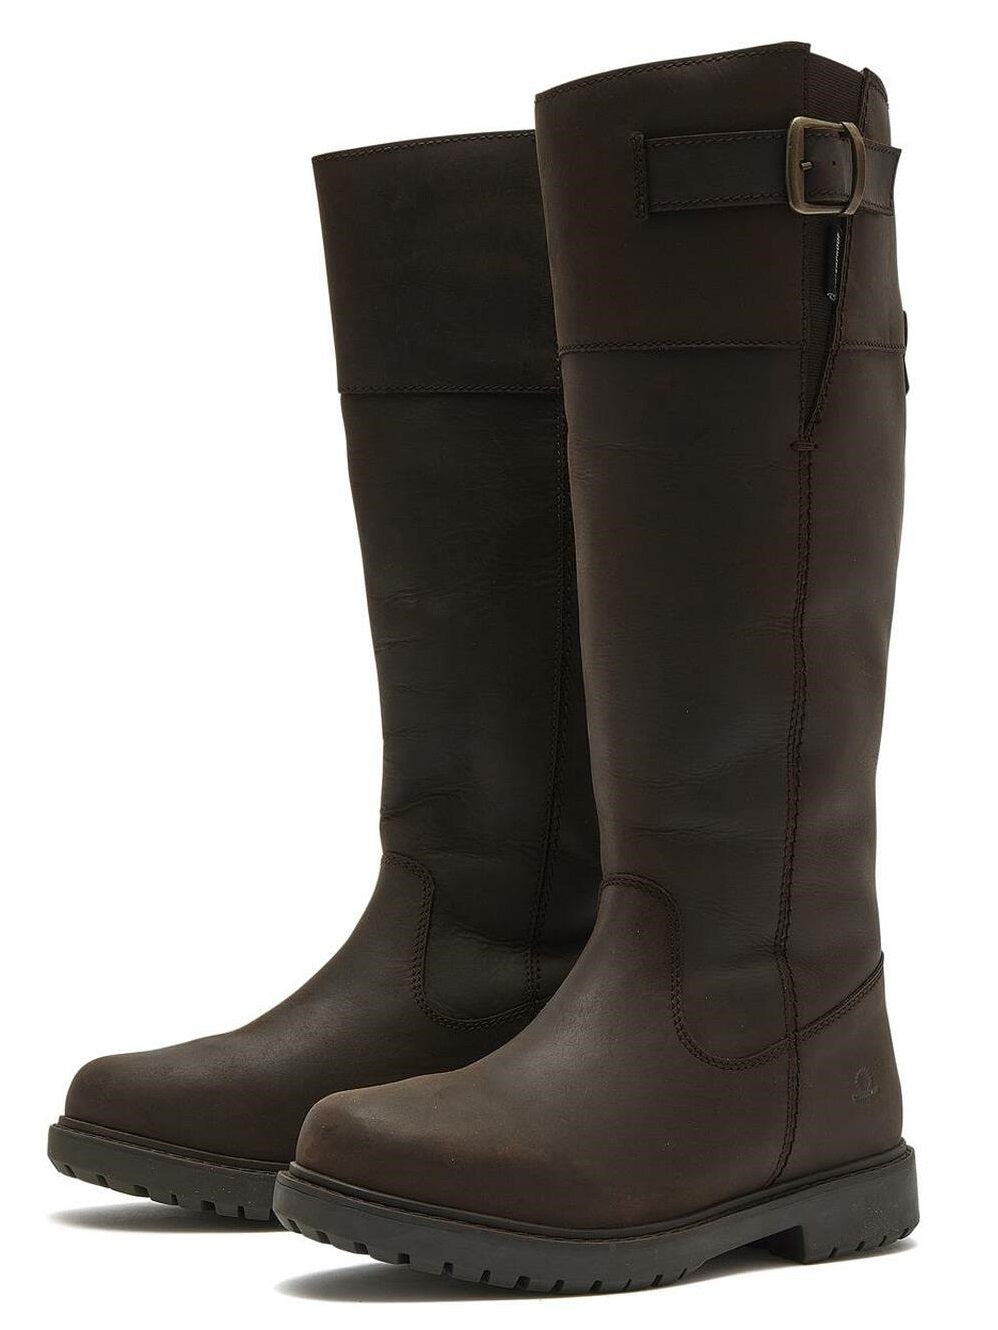 CHATHAM Ladies Brooksby Waterproof Riding Boots - Dark Brown Leather